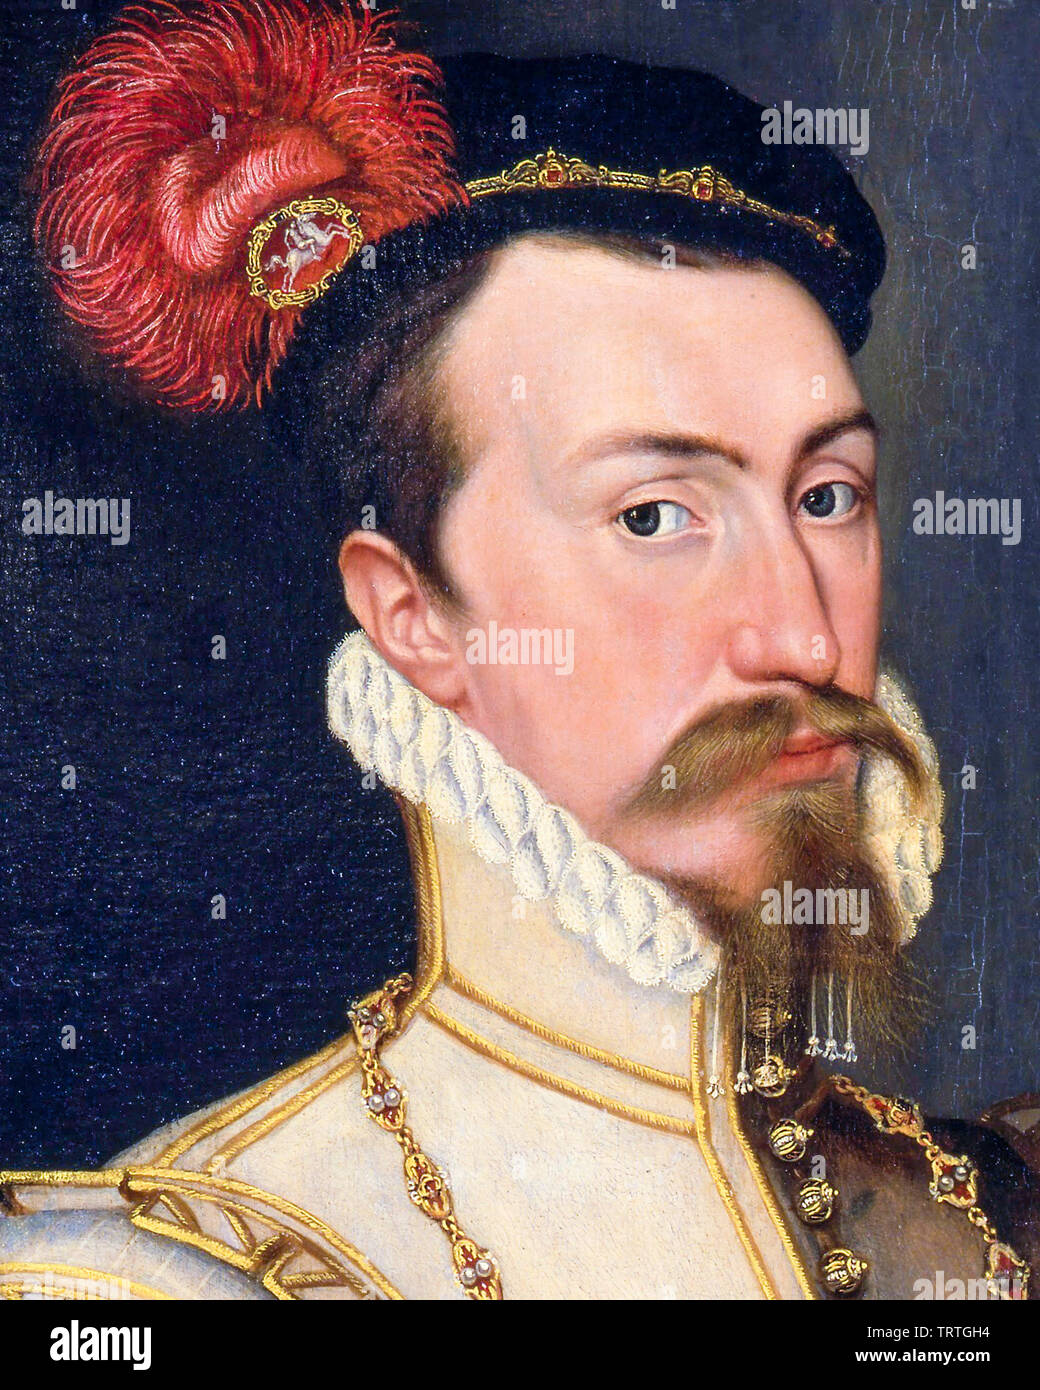 Robert Dudley, 1st Earl of Leicester, 1532-1588, portrait painting (detail), circa 1560 Stock Photo